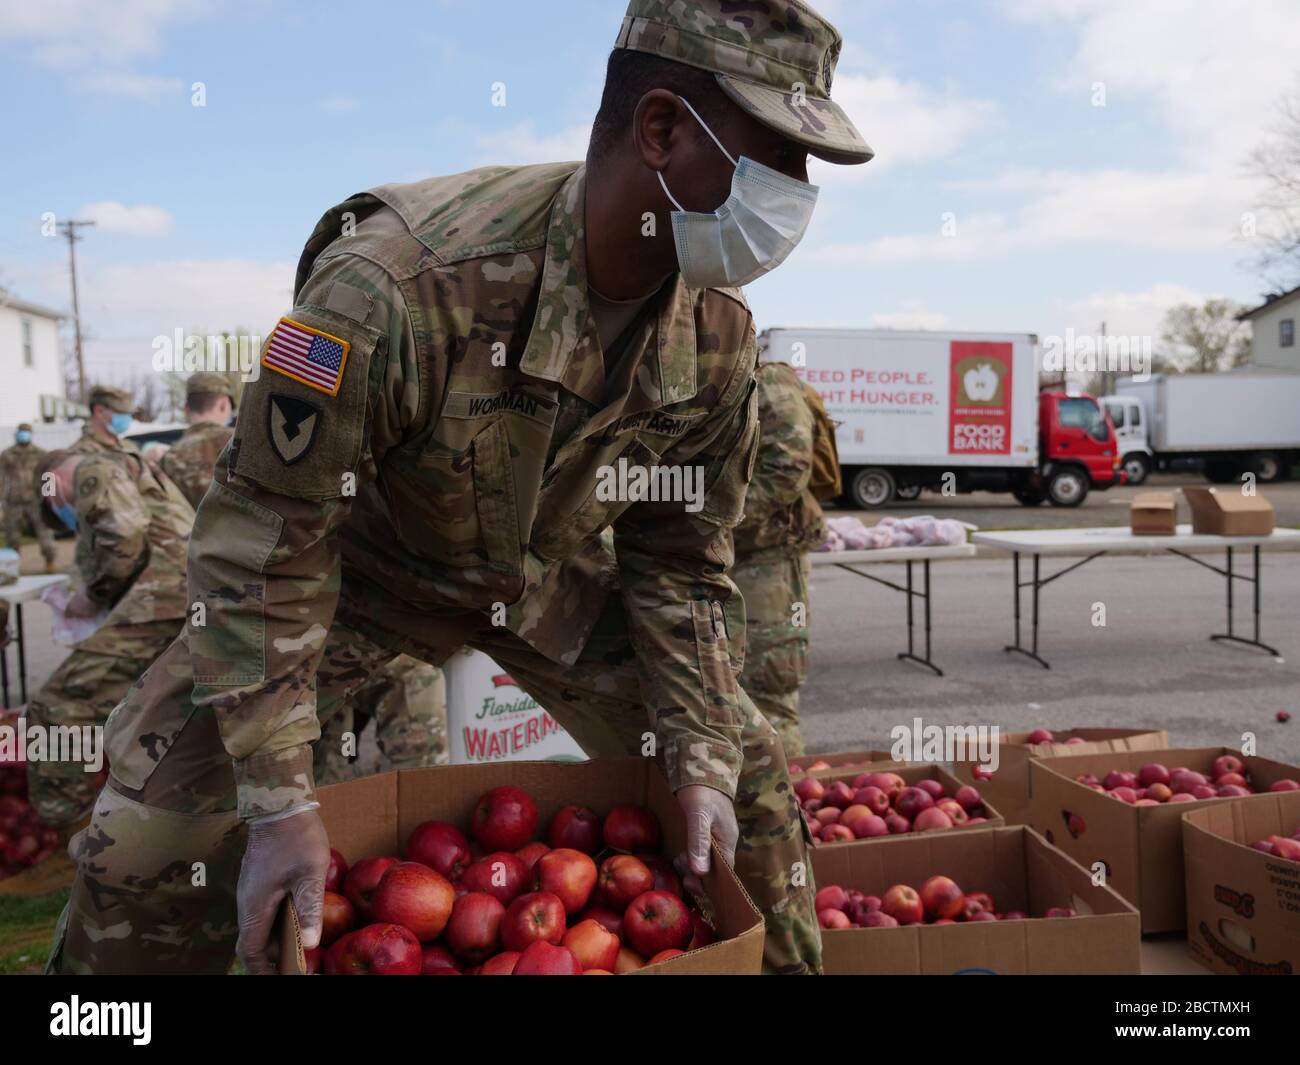 Maryland National Guardsmen, assist the City of Refuge Baltimore, distribute food to members of the community to assist with COVID-19, coronavirus relief March 26, 2020 in Baltimore, Maryland. Stock Photo